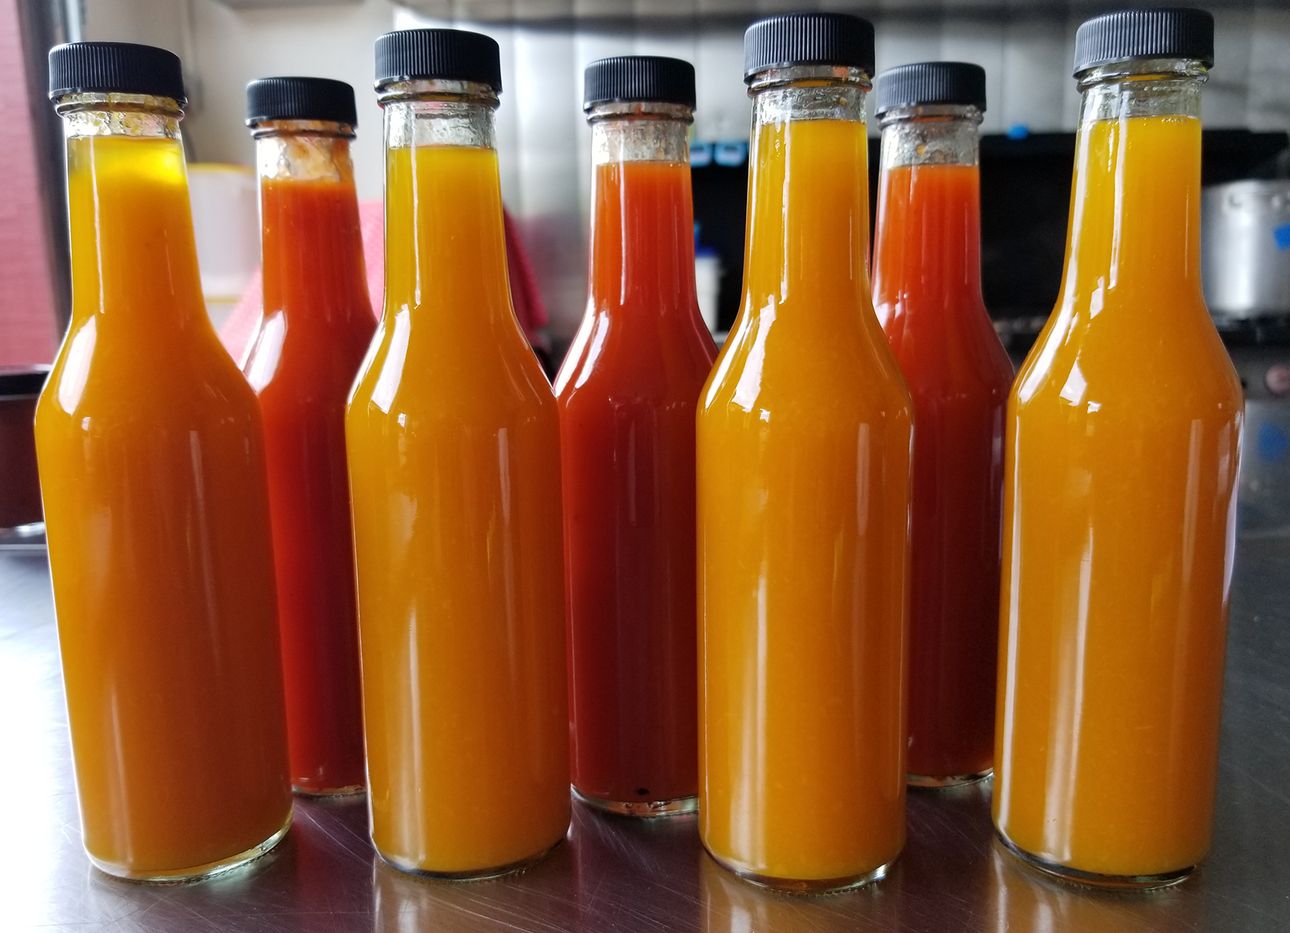 Orange and red hot sauces, unlabeled.